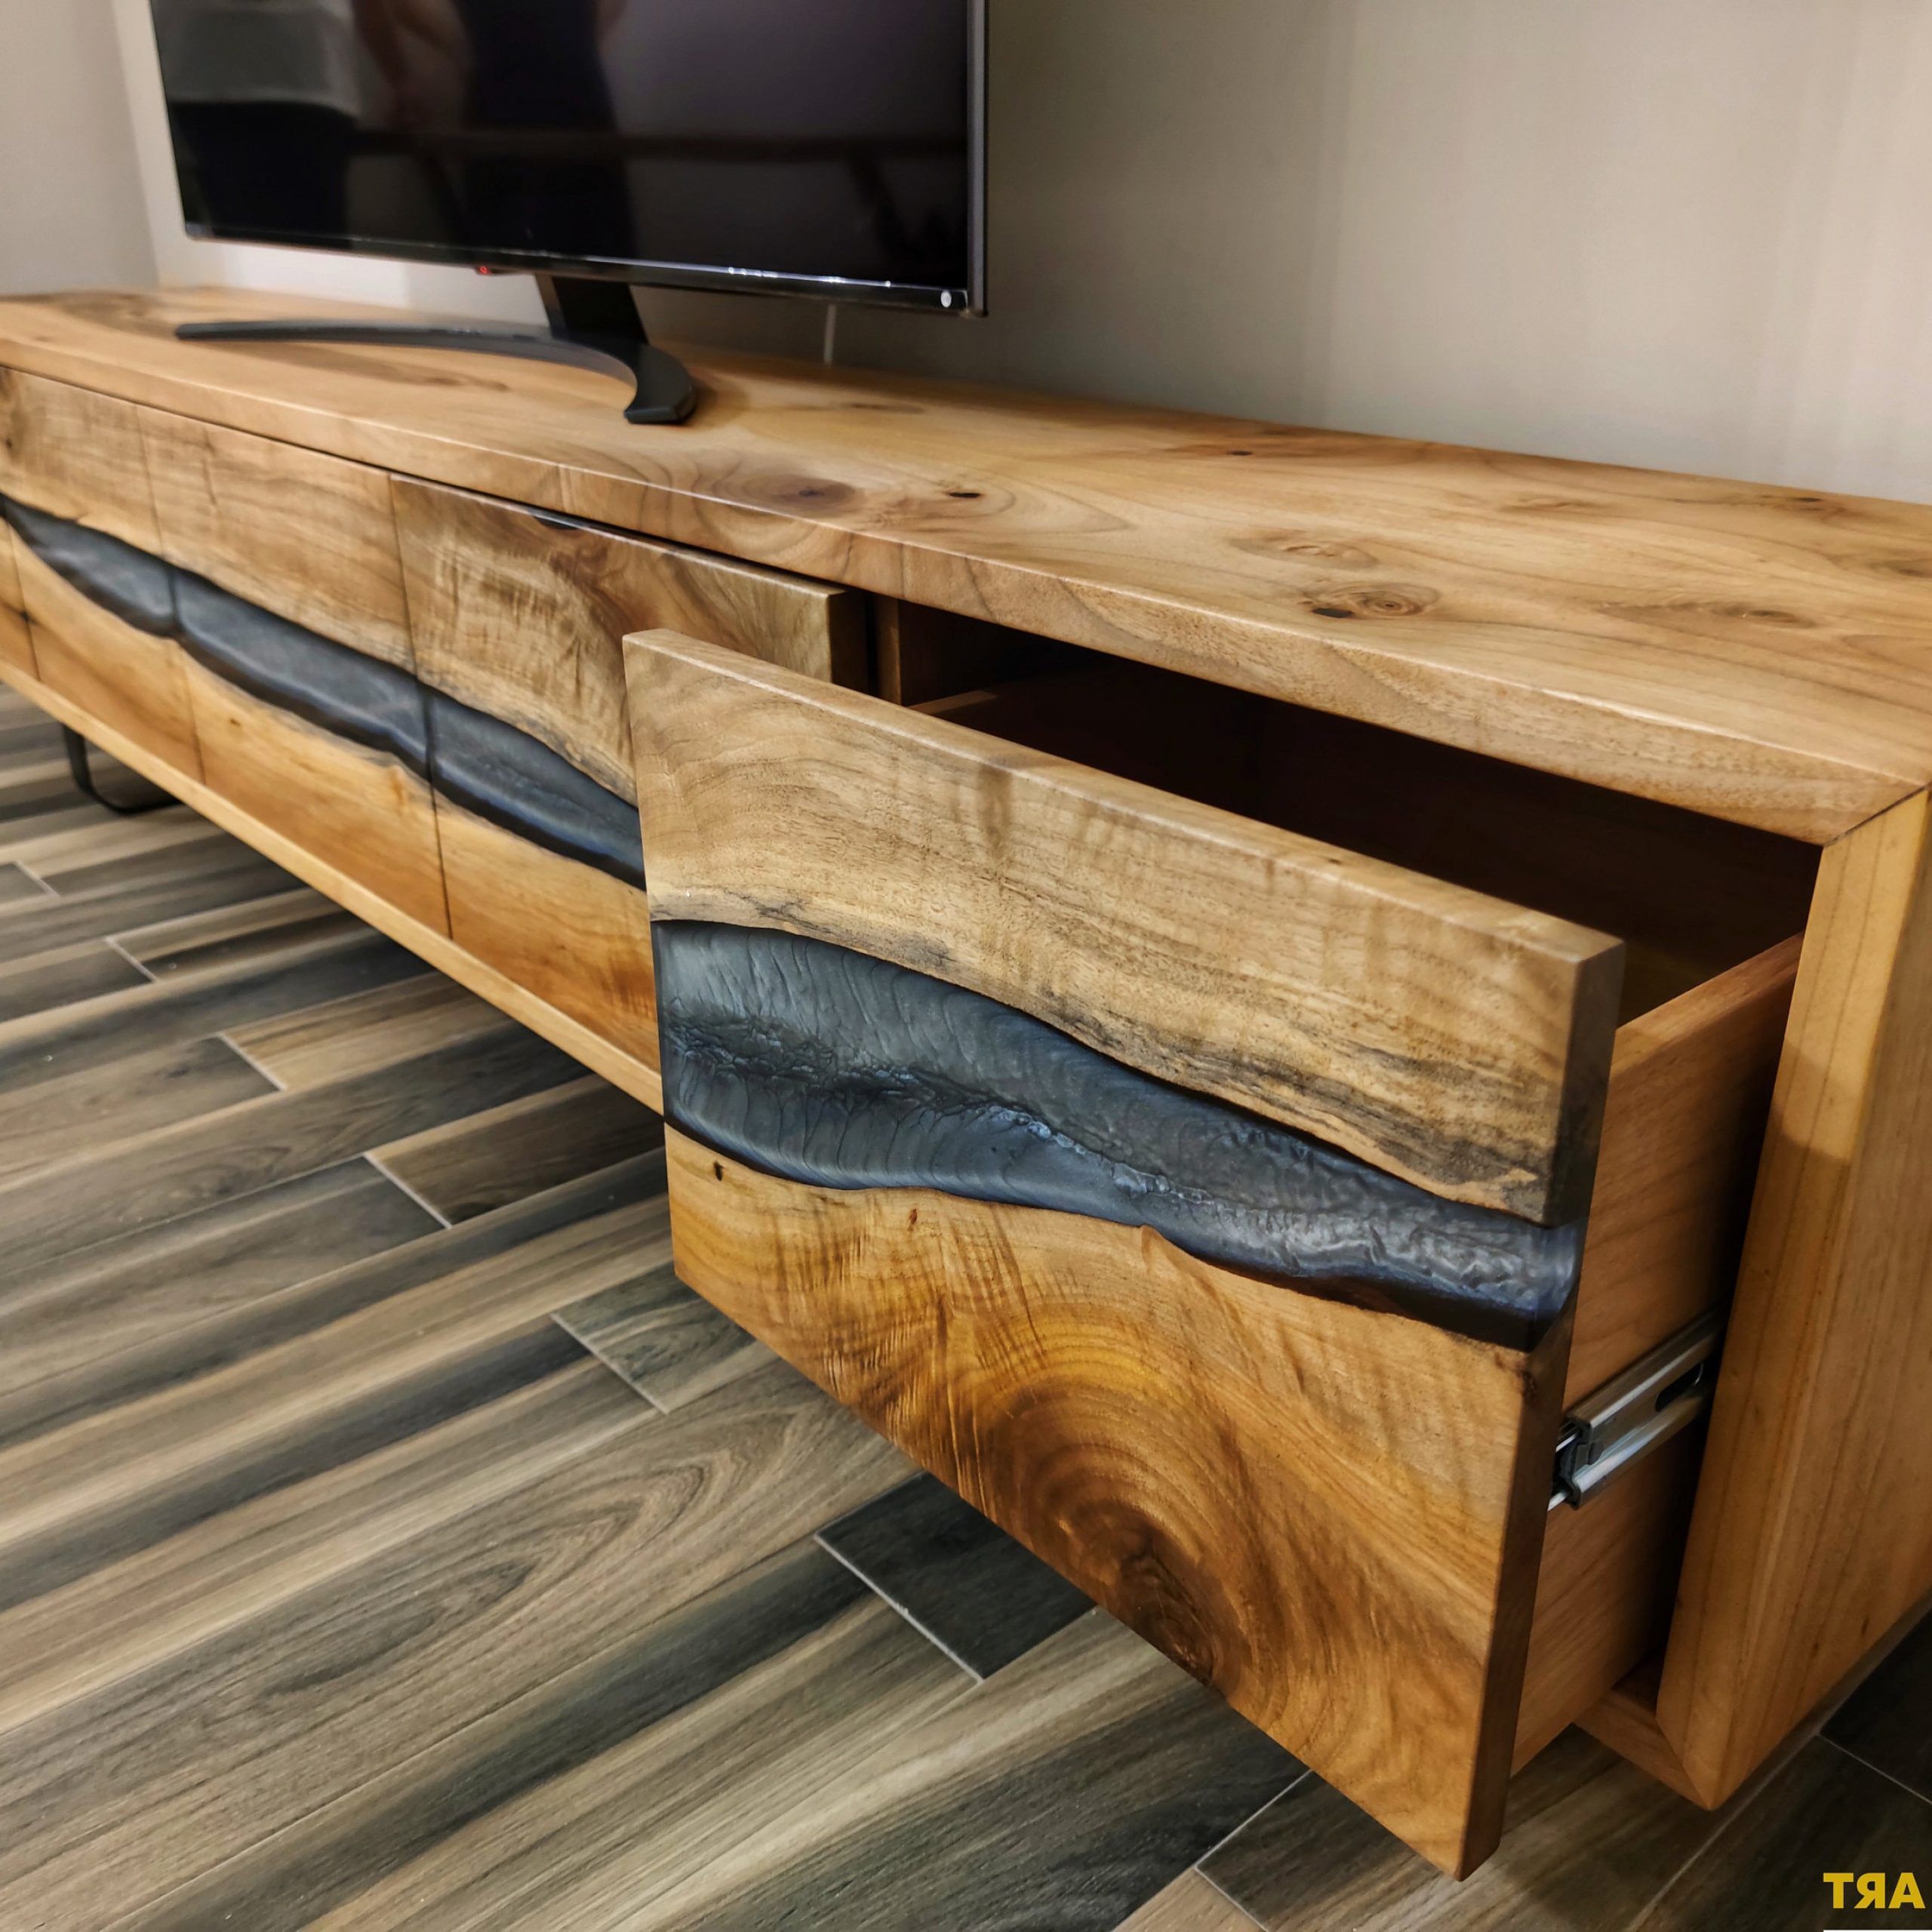 Resin Tv Stands Within Well Known Resin Tv Unit – Etsy (View 3 of 10)